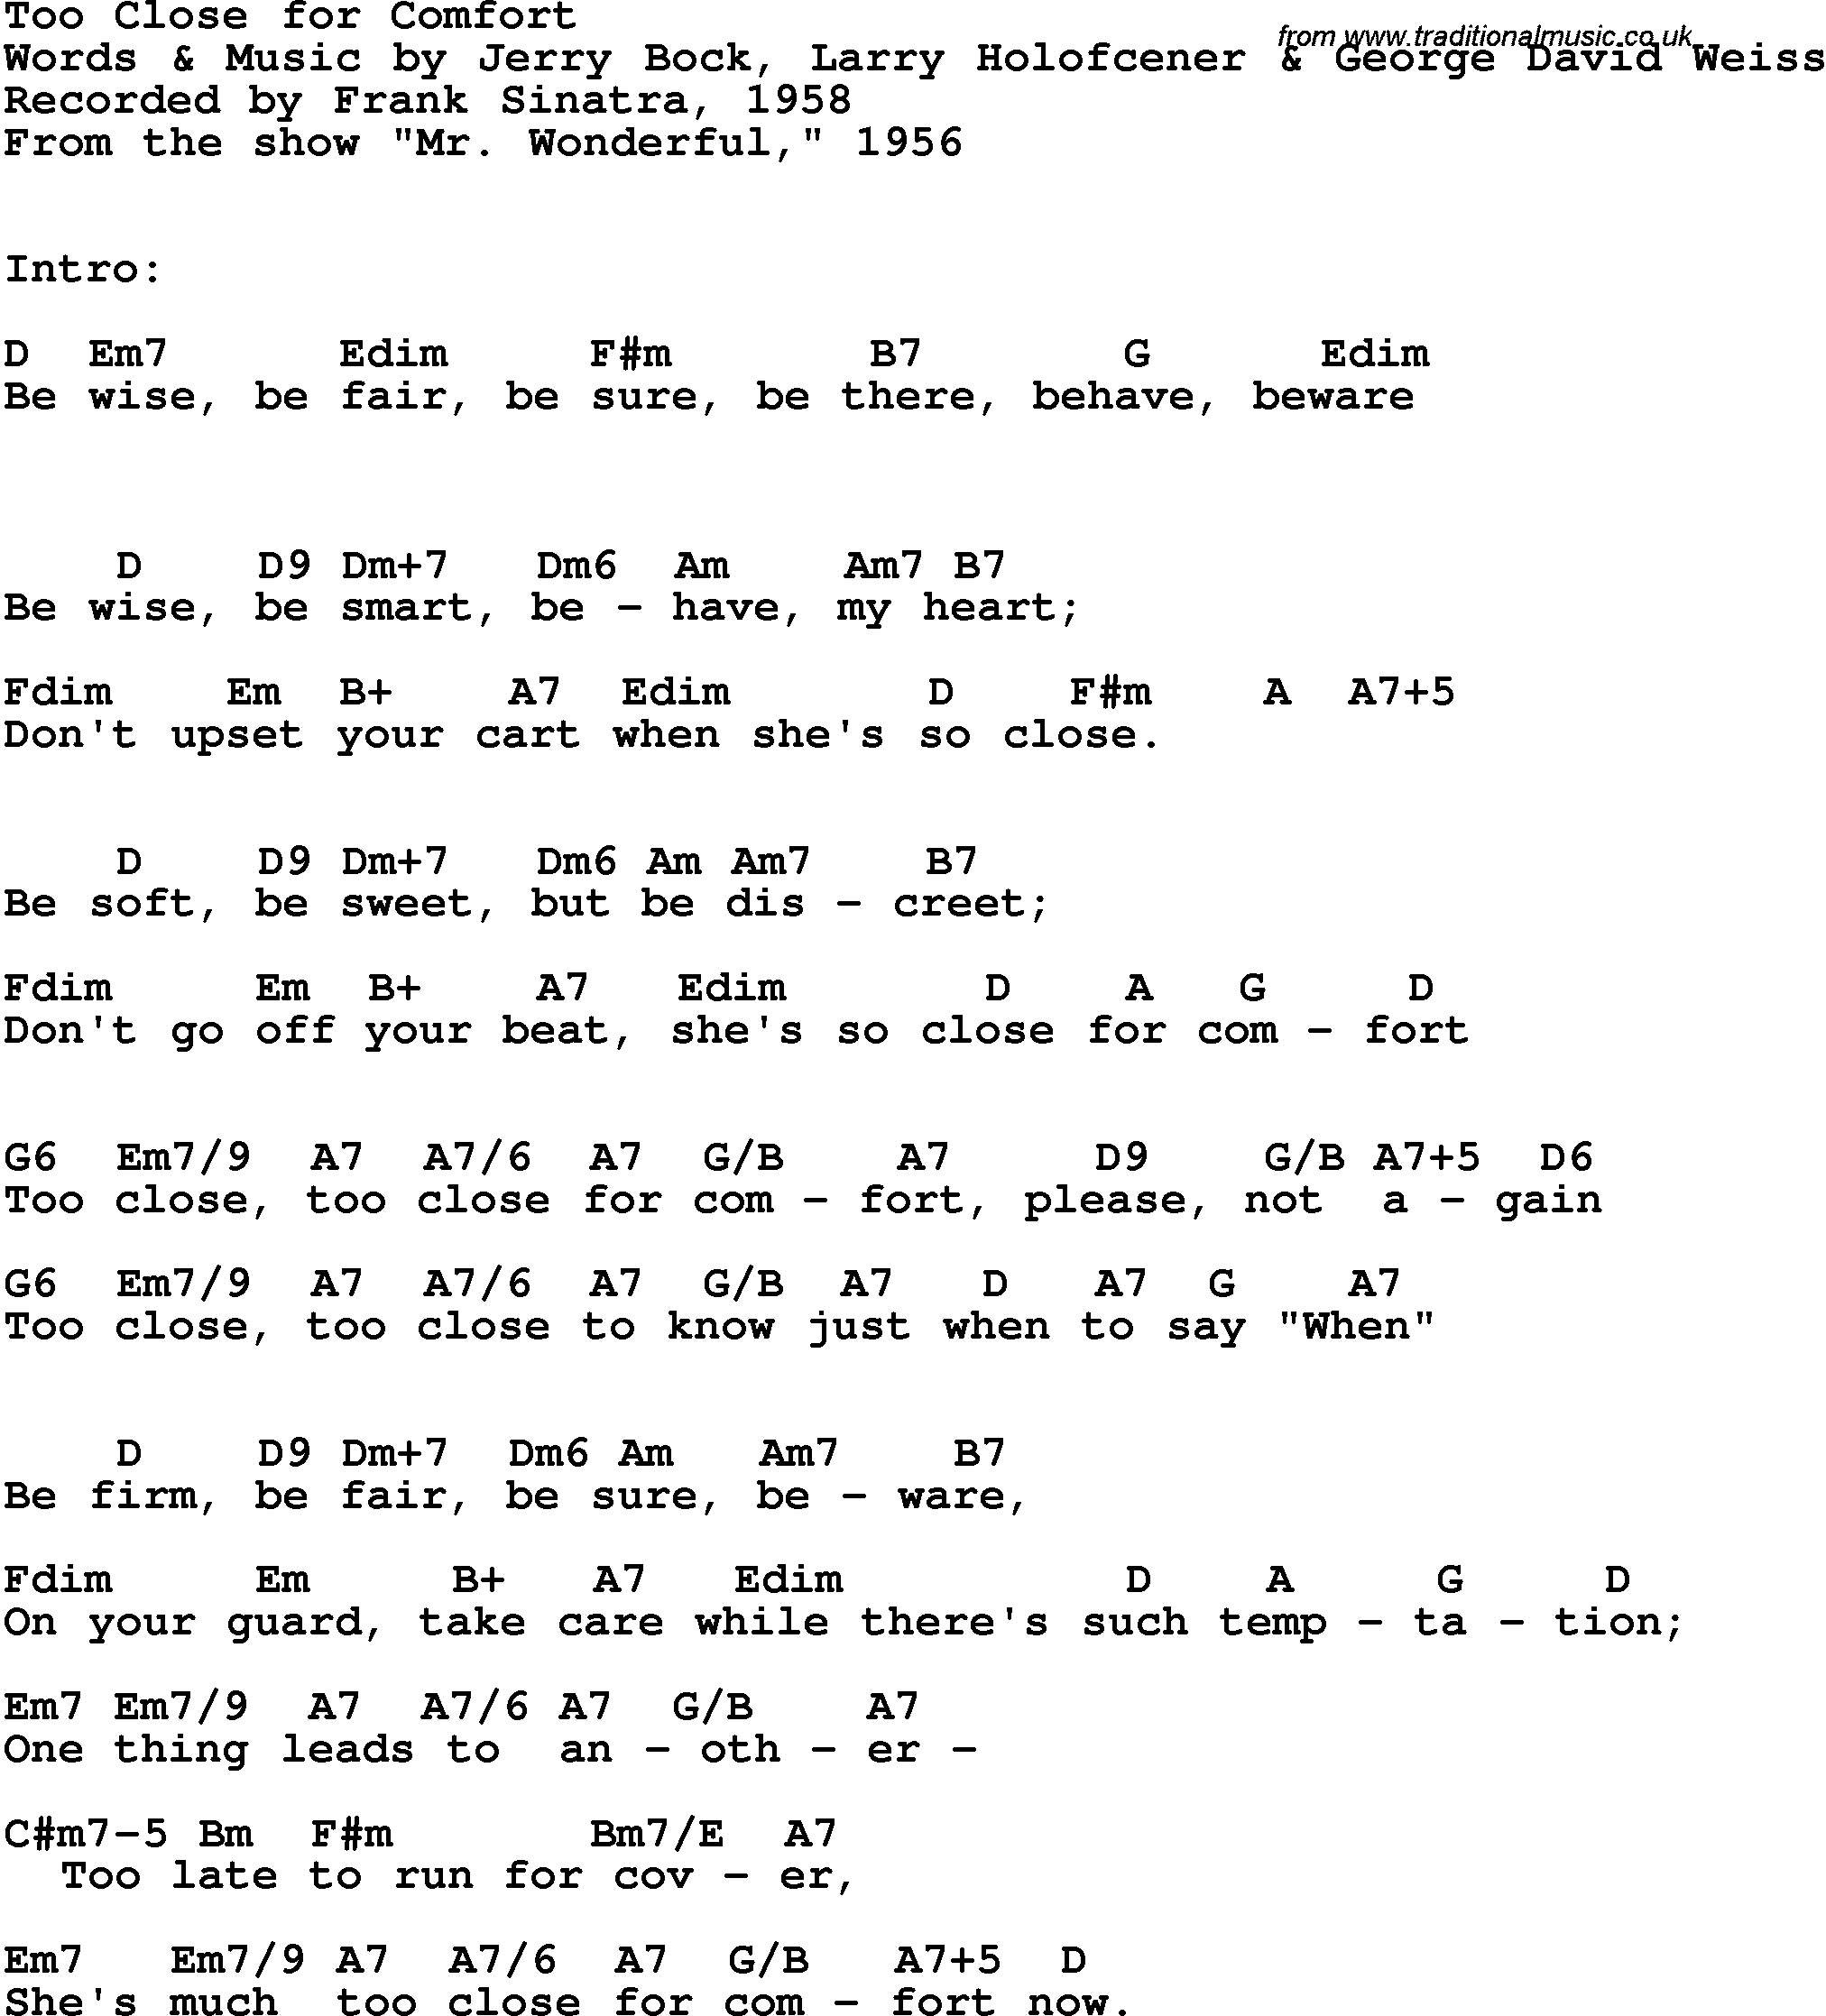 Song Lyrics with guitar chords for Too Close For Comfort - Frank Sinatra, 1958